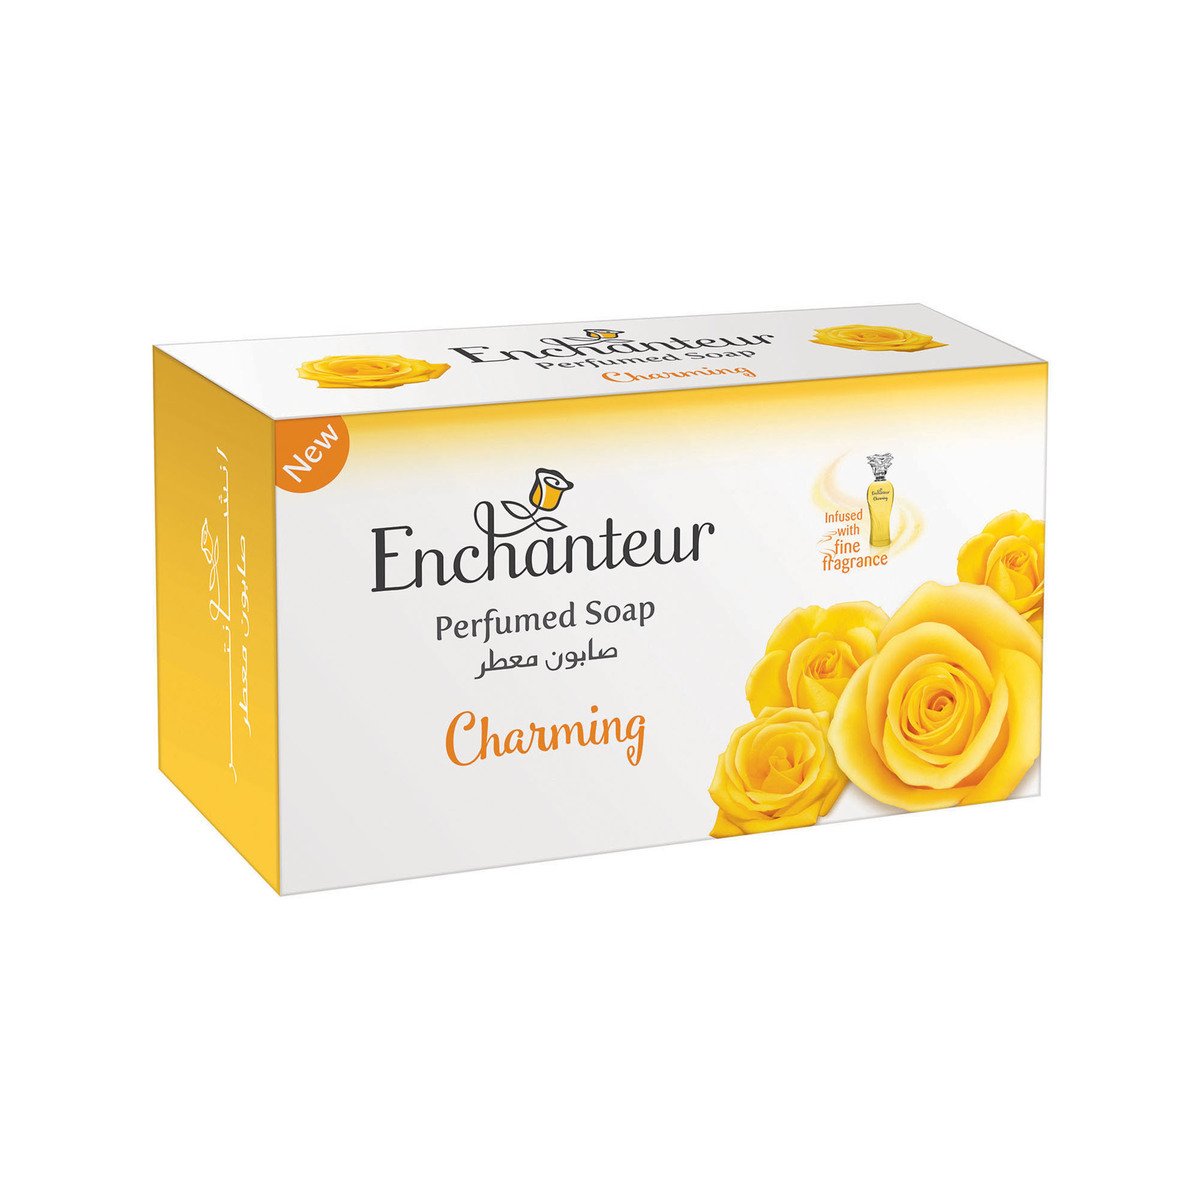 Enchanteur Charming soap with Citrus and Cedarwood Extracts, 125 g